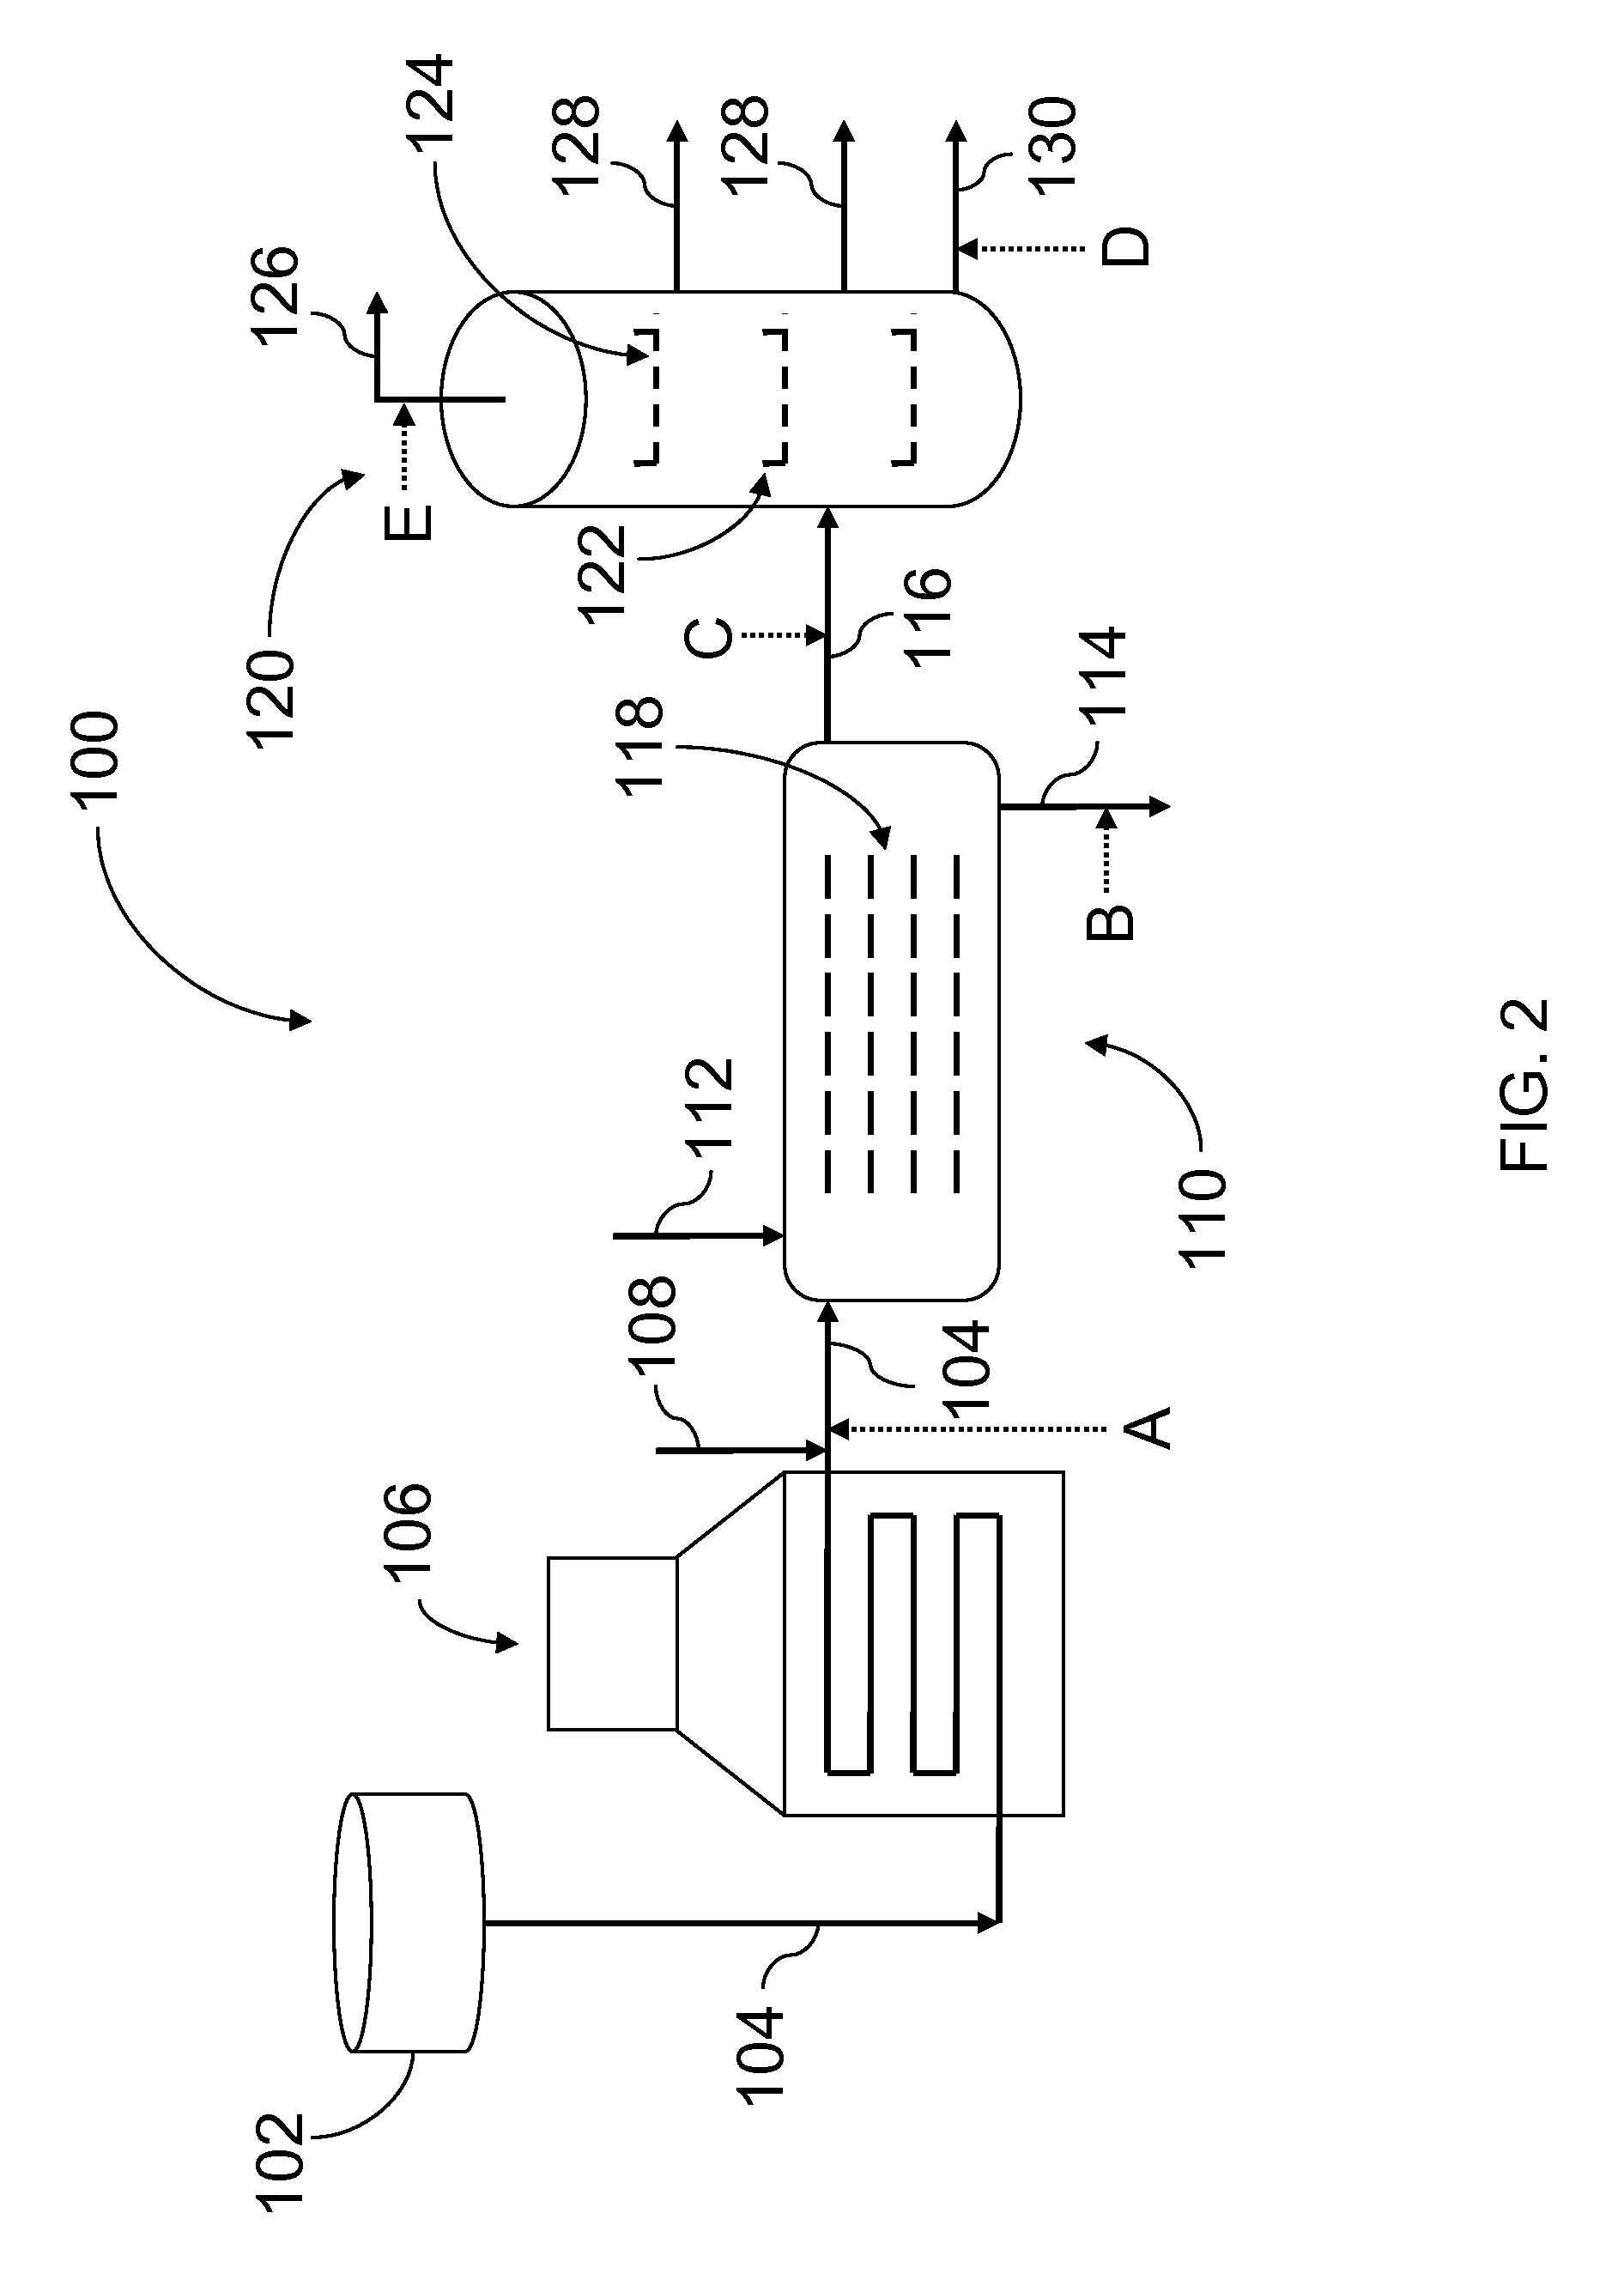 System and method for separating a trace element from a liquid hydrocarbon feed